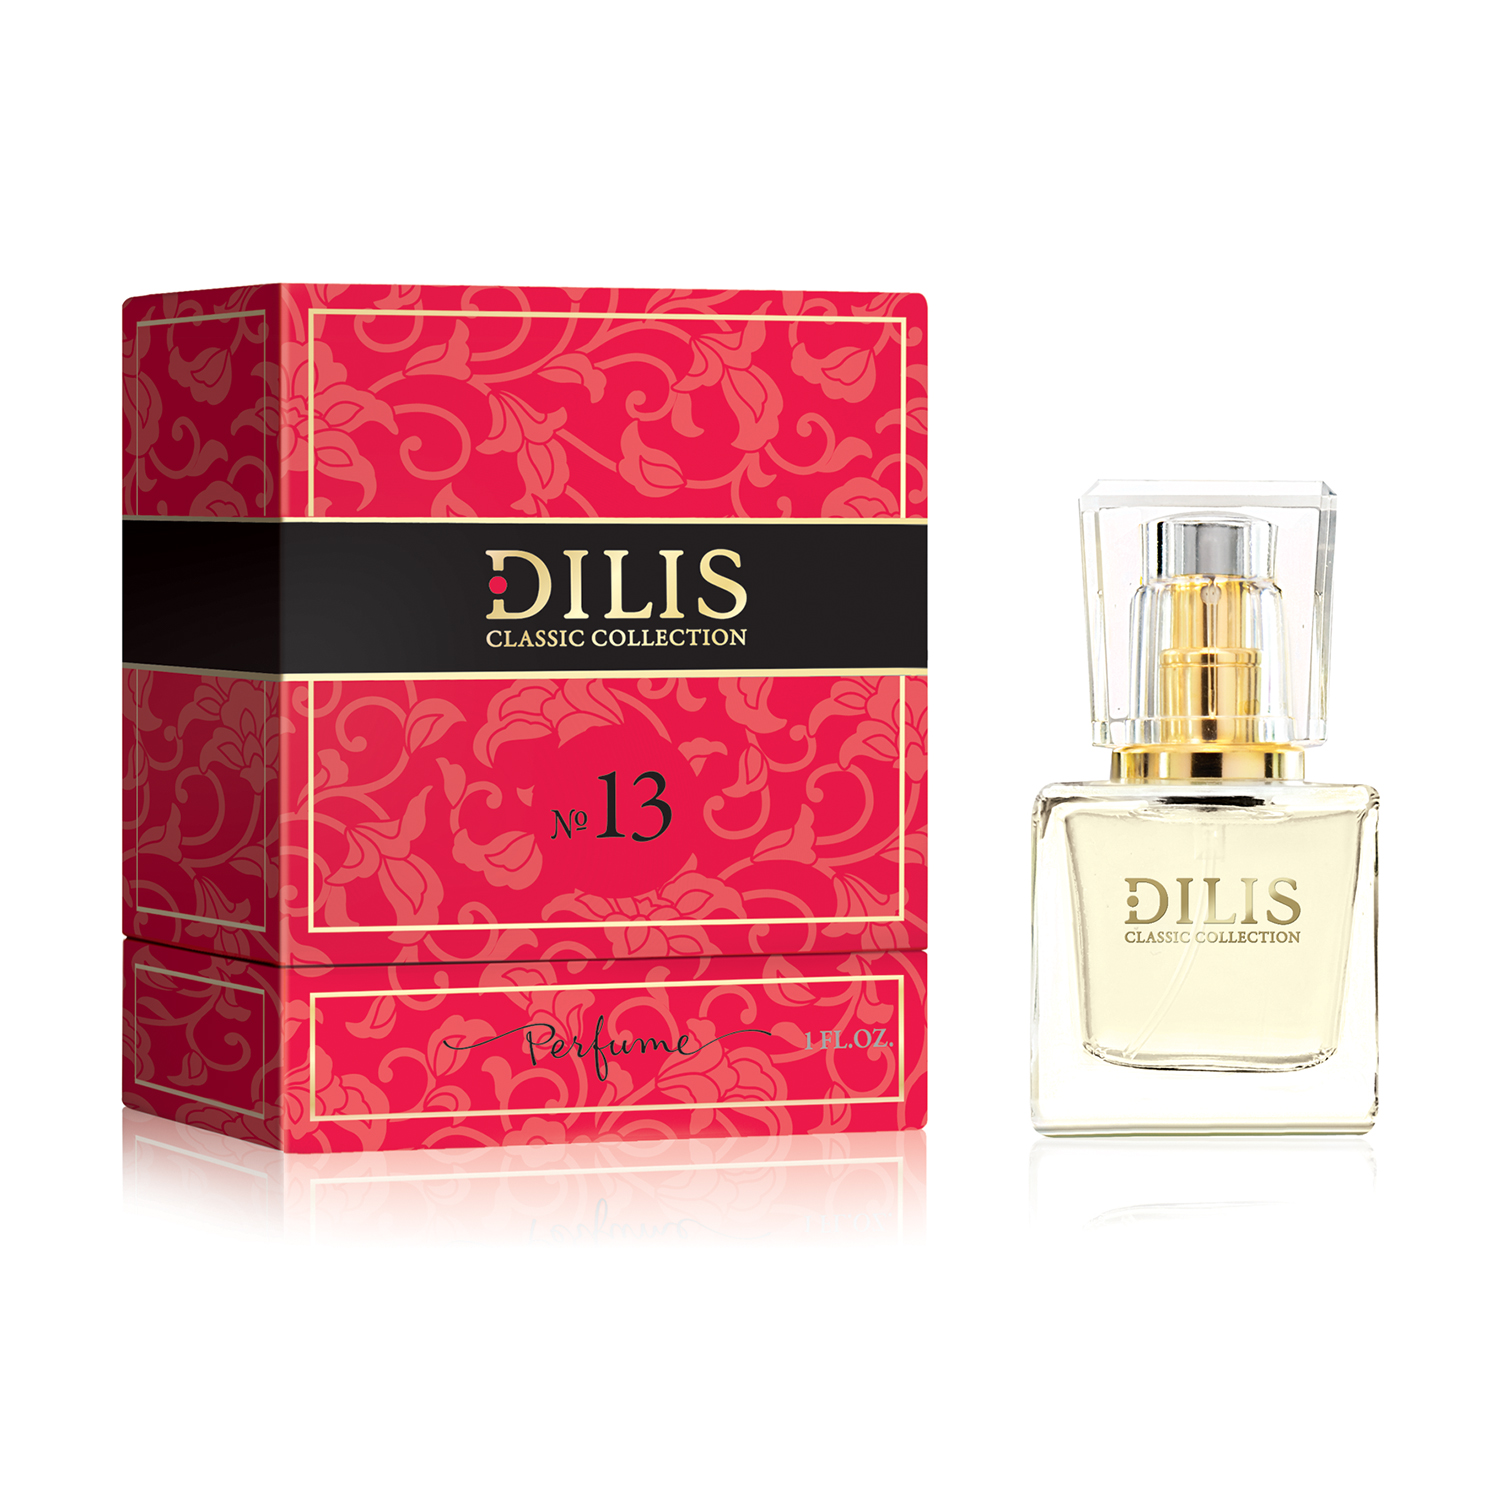 Dilis pepper. Духи женские Экстра Dilis Classic collection №13, Dilis. Dilis Classic collection духи №01 (climat by Lancome)(321н)30мл. Духи Dilis Classic collection №22. Духи женские Экстра Dilis Classic collection 30.